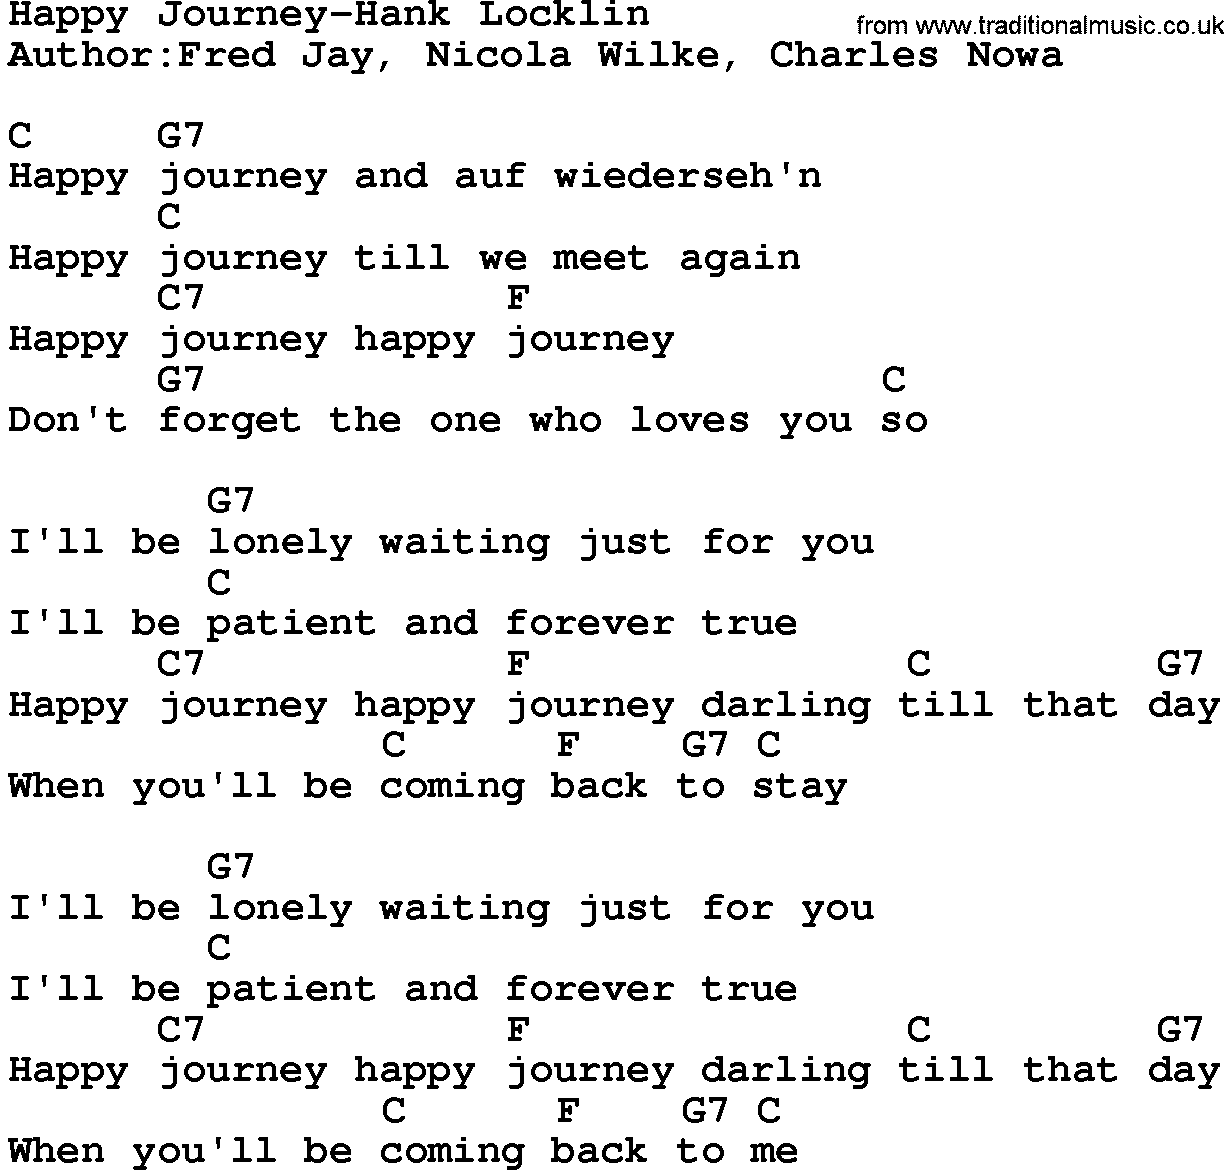 Country music song: Happy Journey-Hank Locklin lyrics and chords